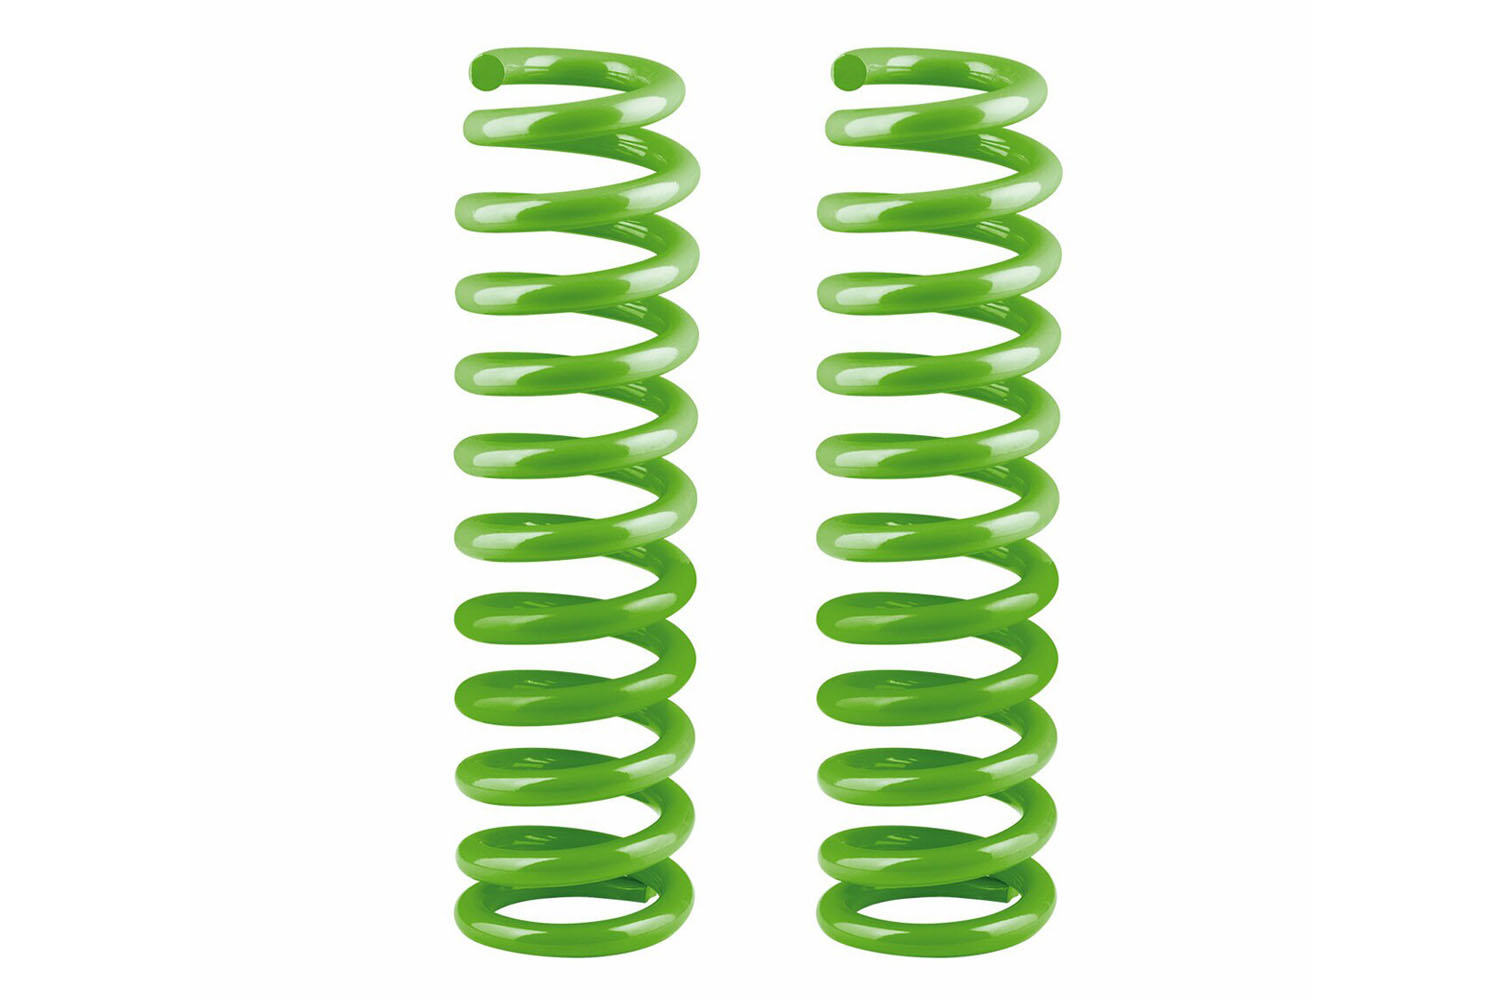 Are these coil springs side specific or are they exactly the same and interchangeable?